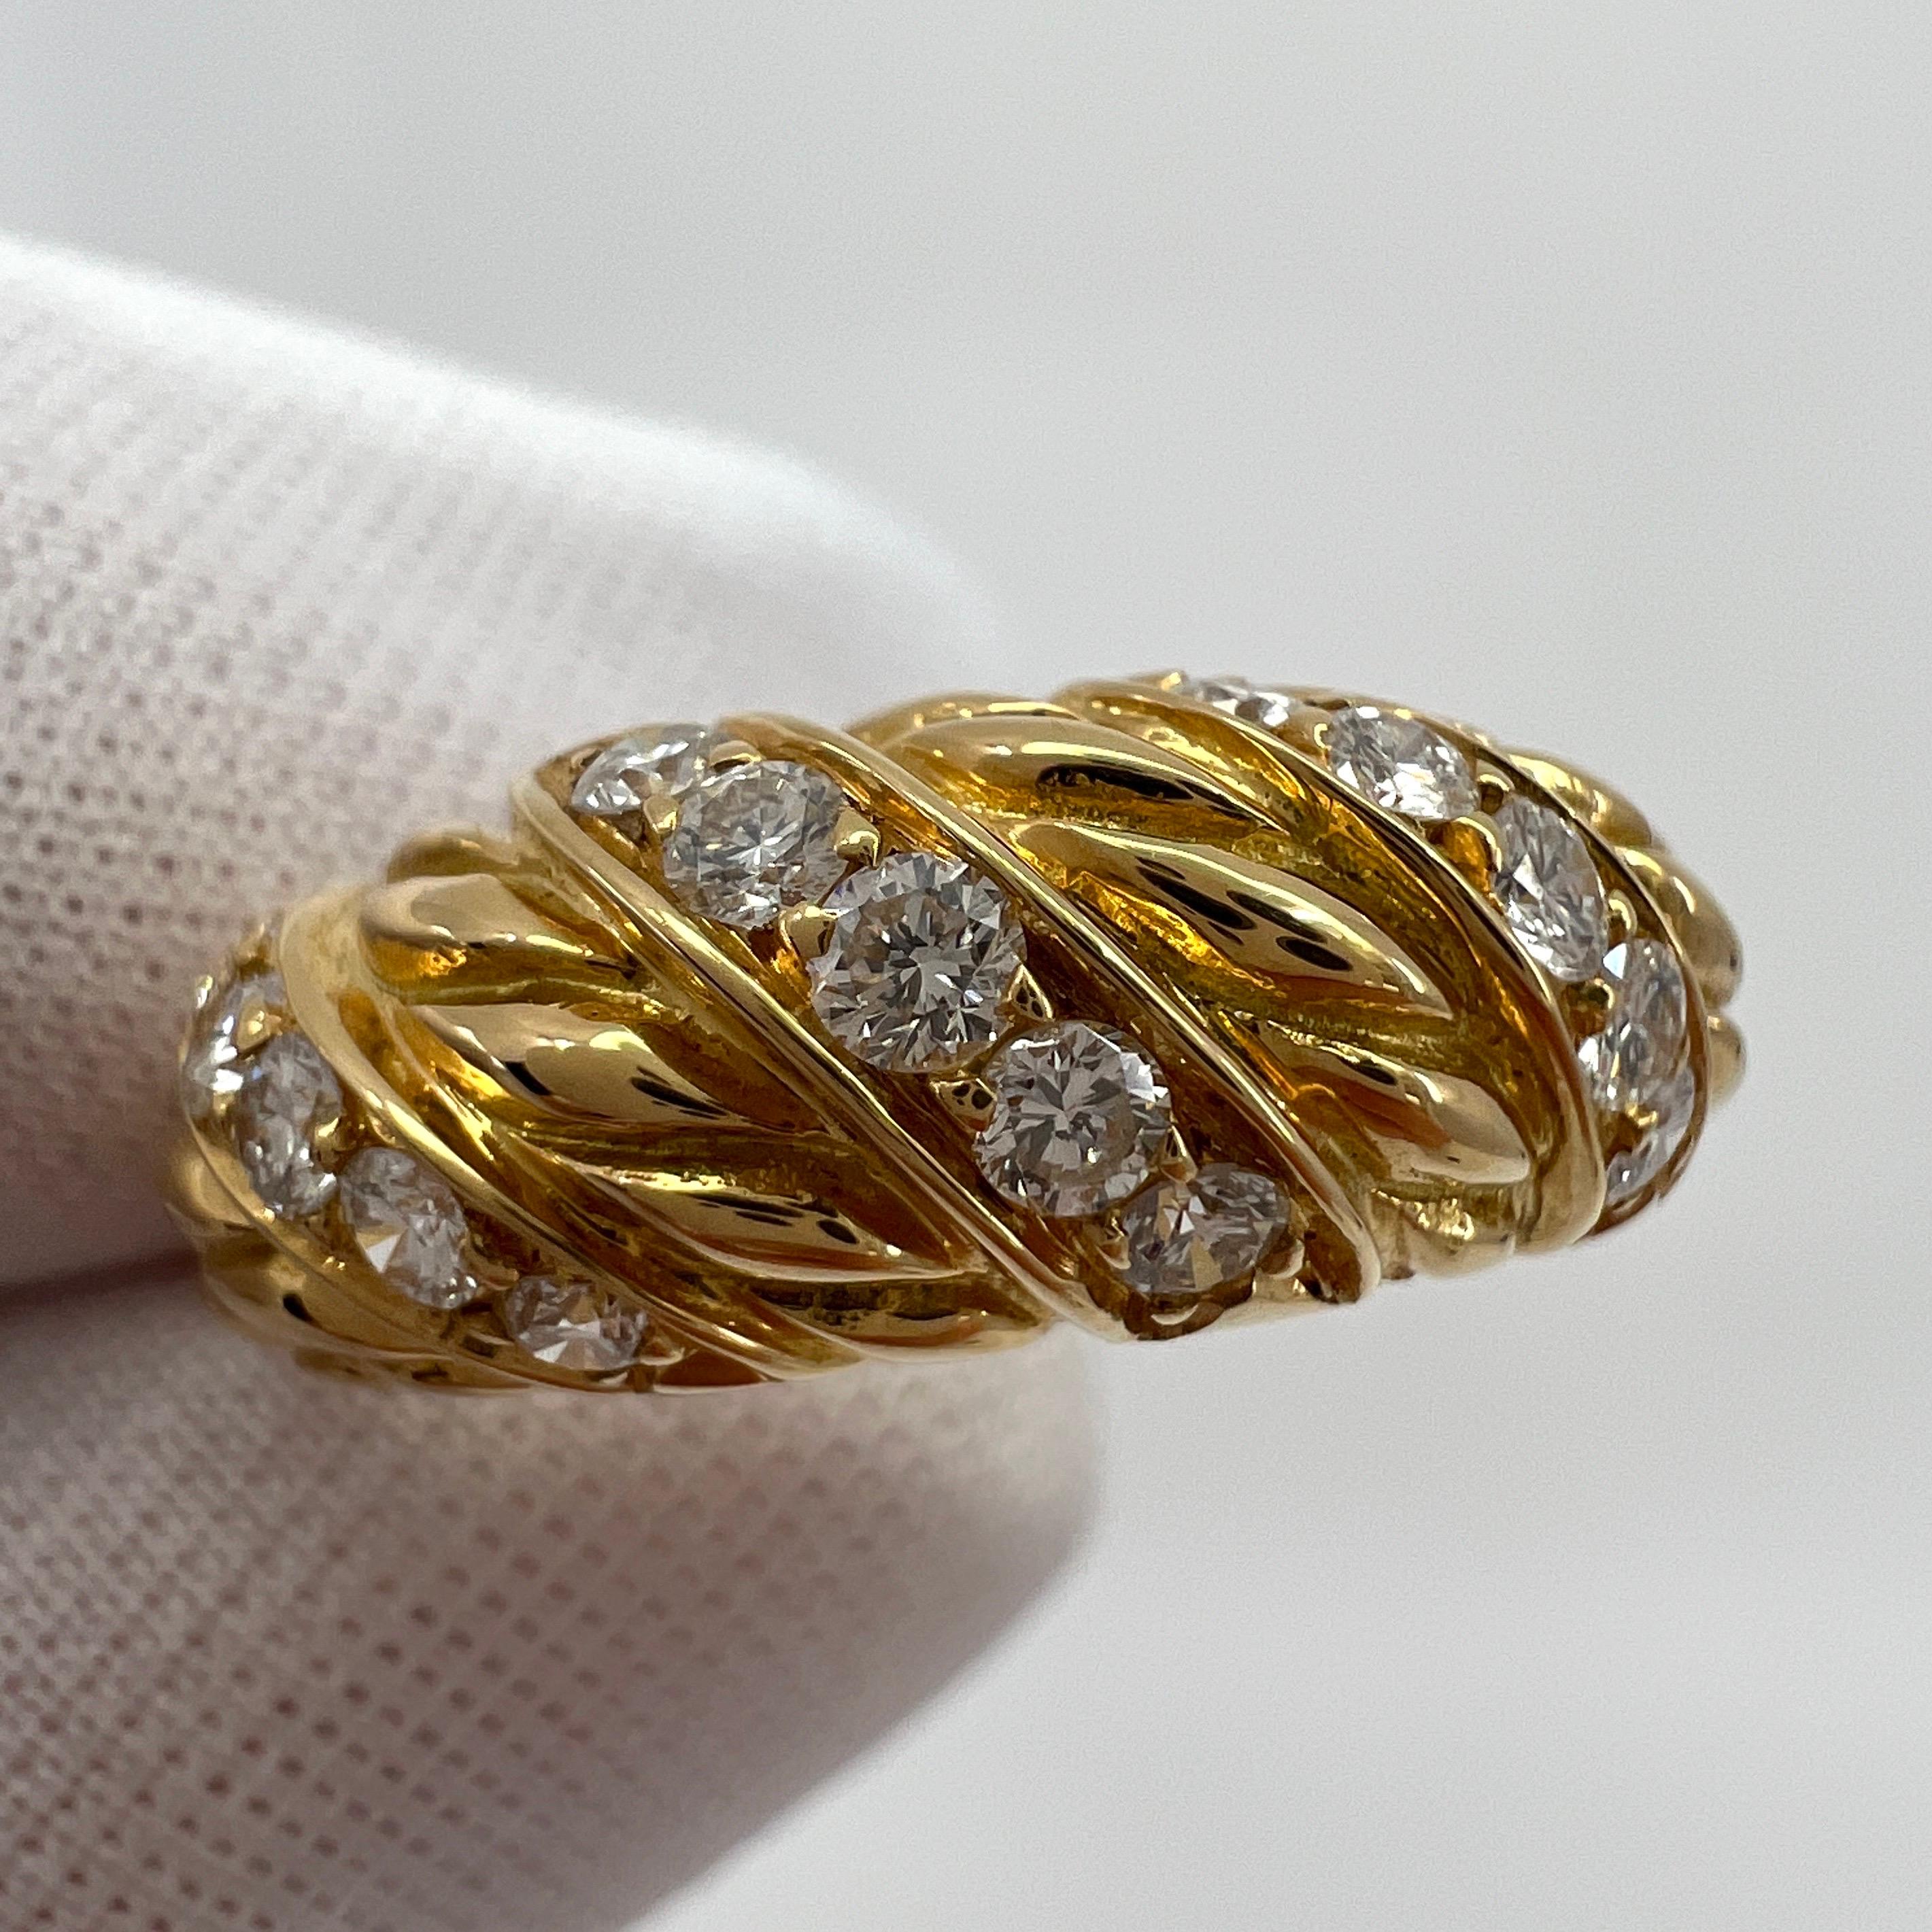 Vintage Van Cleef & Arpels 18 Karat Yellow Gold Twist Braid Diamond Ring.

A stunning vintage VCA ring with a unique braid twist design and x15 round brilliant cut diamonds. The diamonds have excellent F/G colour and VVS clarity. All with an